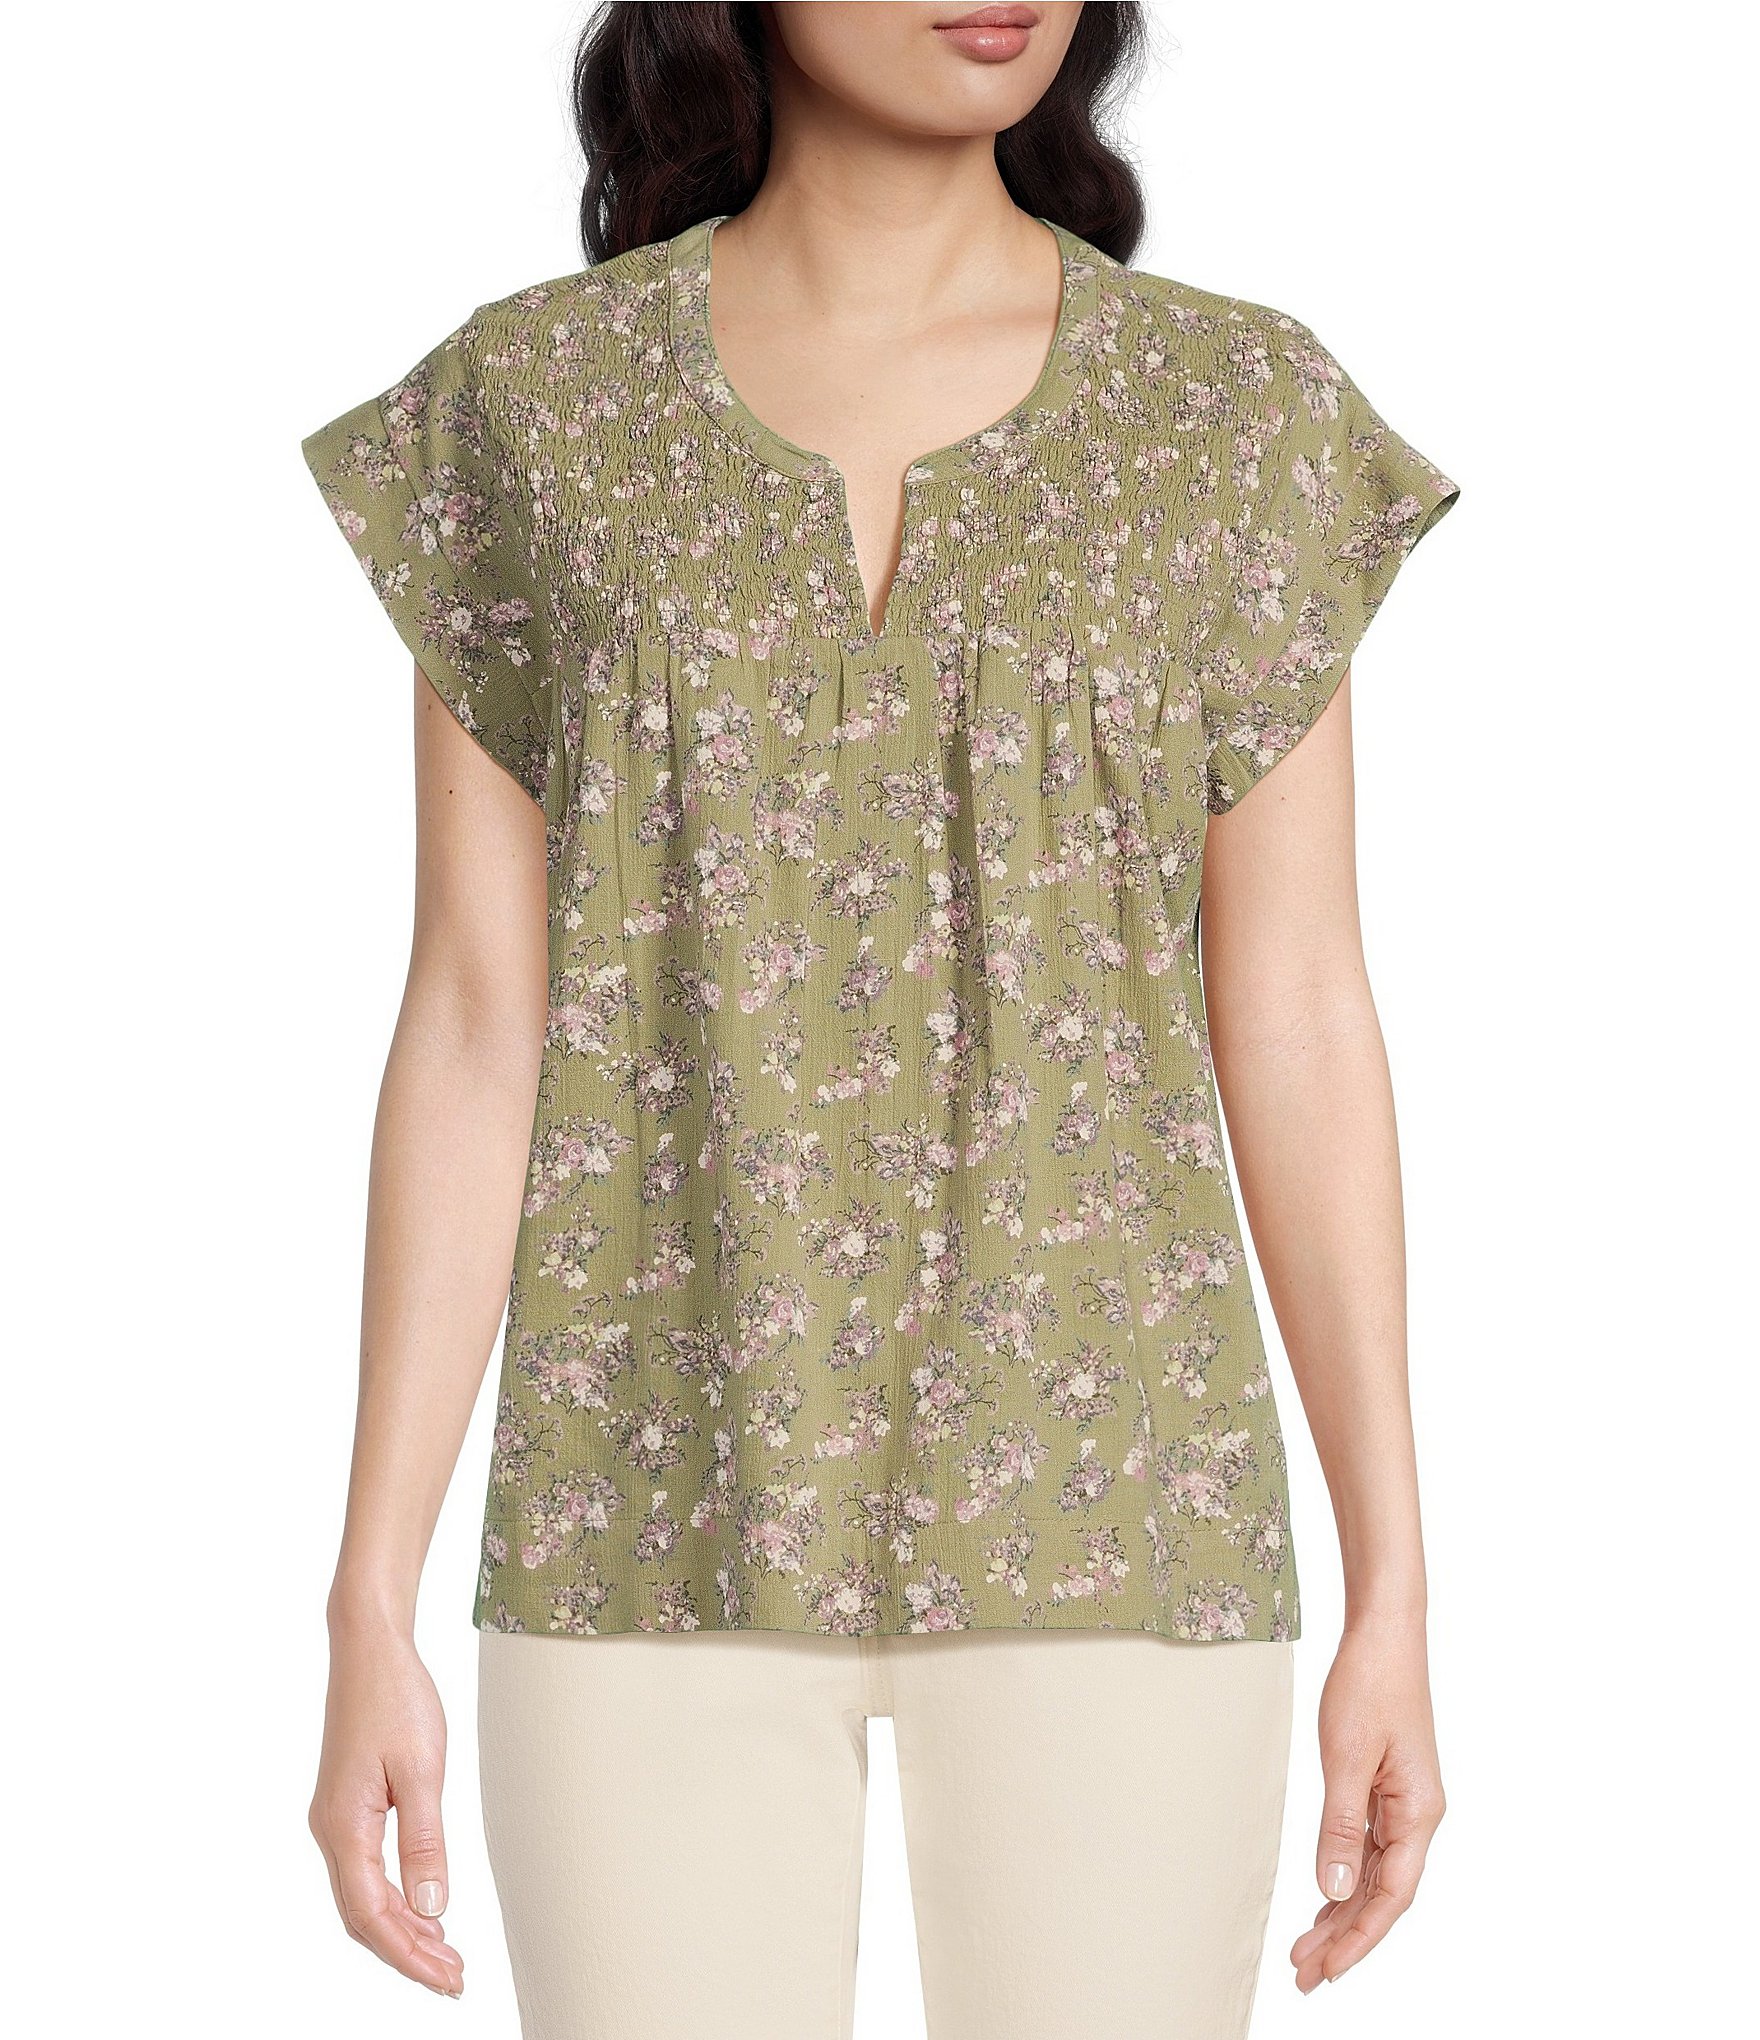 Lucky Brand Women's Clothing & Apparel